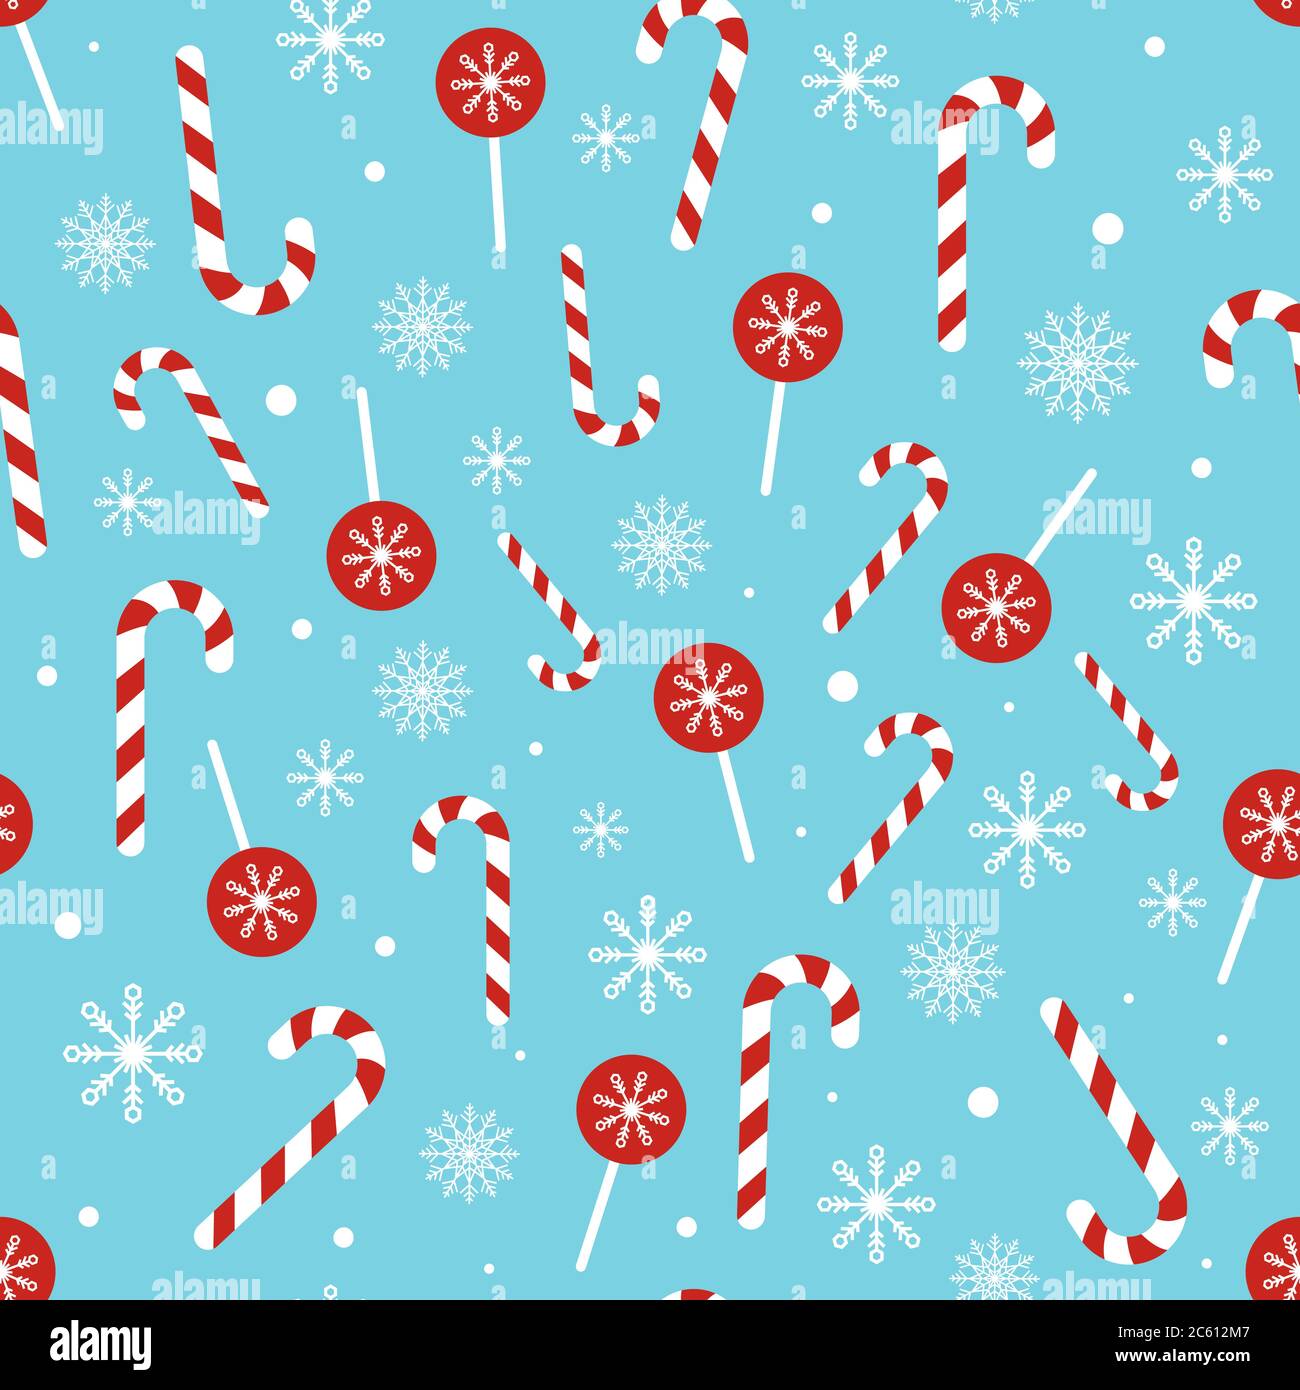 Christmas candy pattern on blue background. Seamless texture with Christmas candy cane, lollipop and snowflakes. Winter holidays print for textile, wa Stock Vector